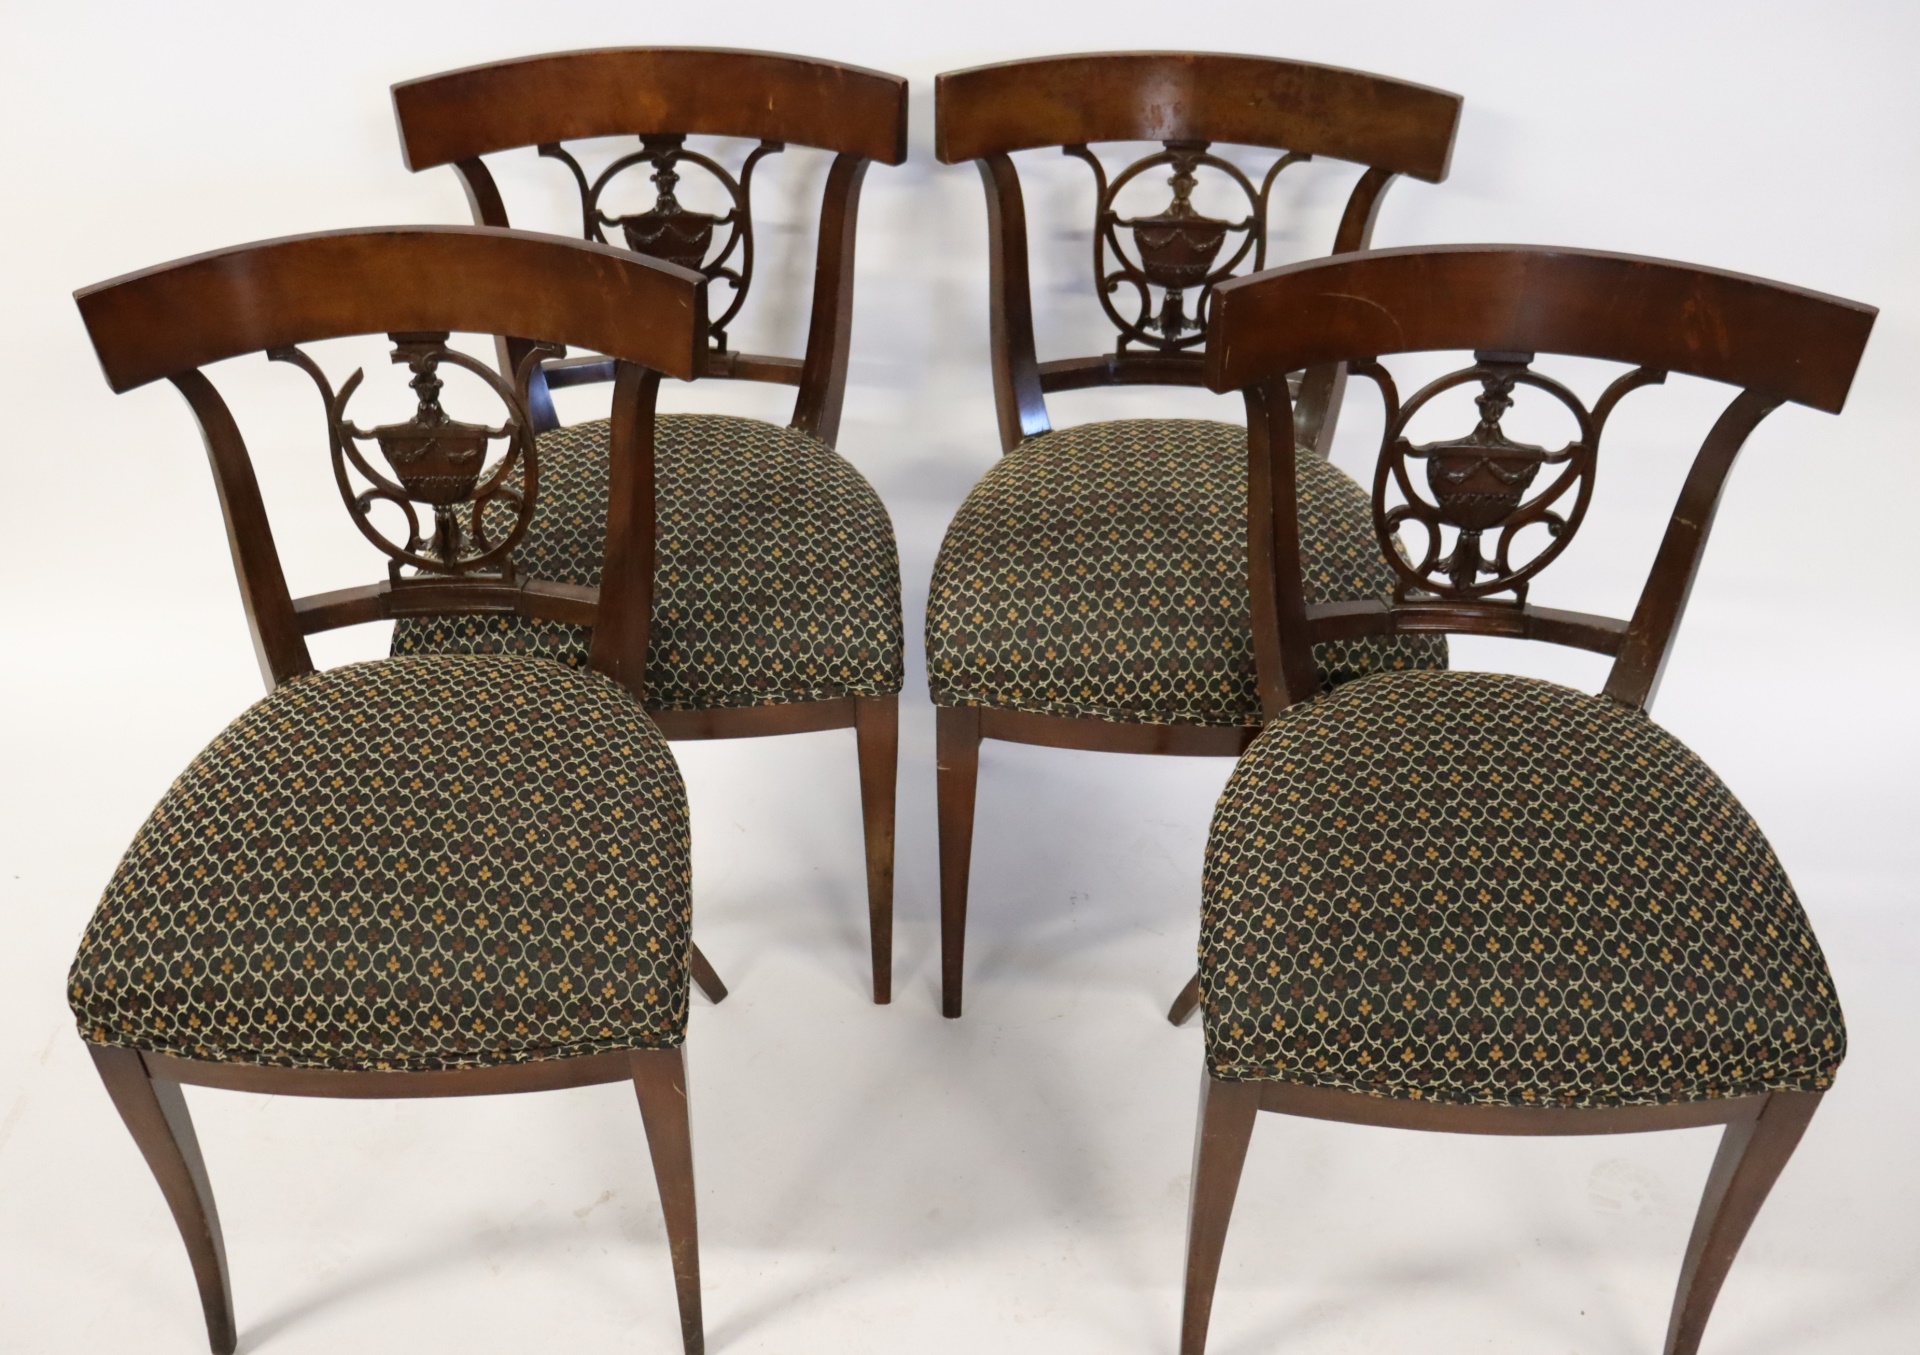 4 NEOCLASSICAL STYLE CHAIRS From 3bded0